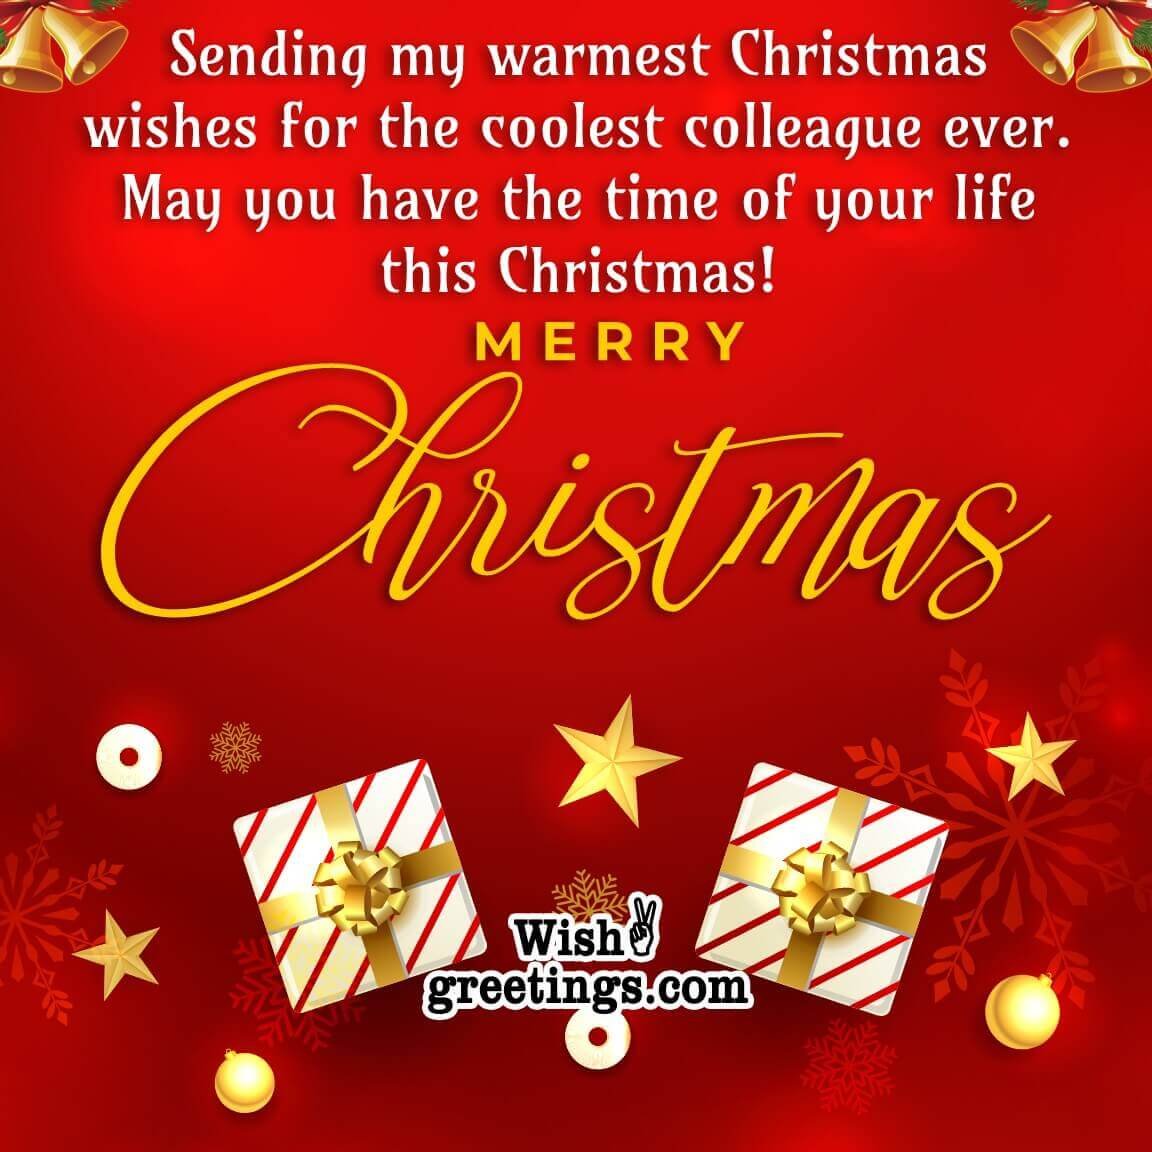 Merry Christmas Message Image For Colleague